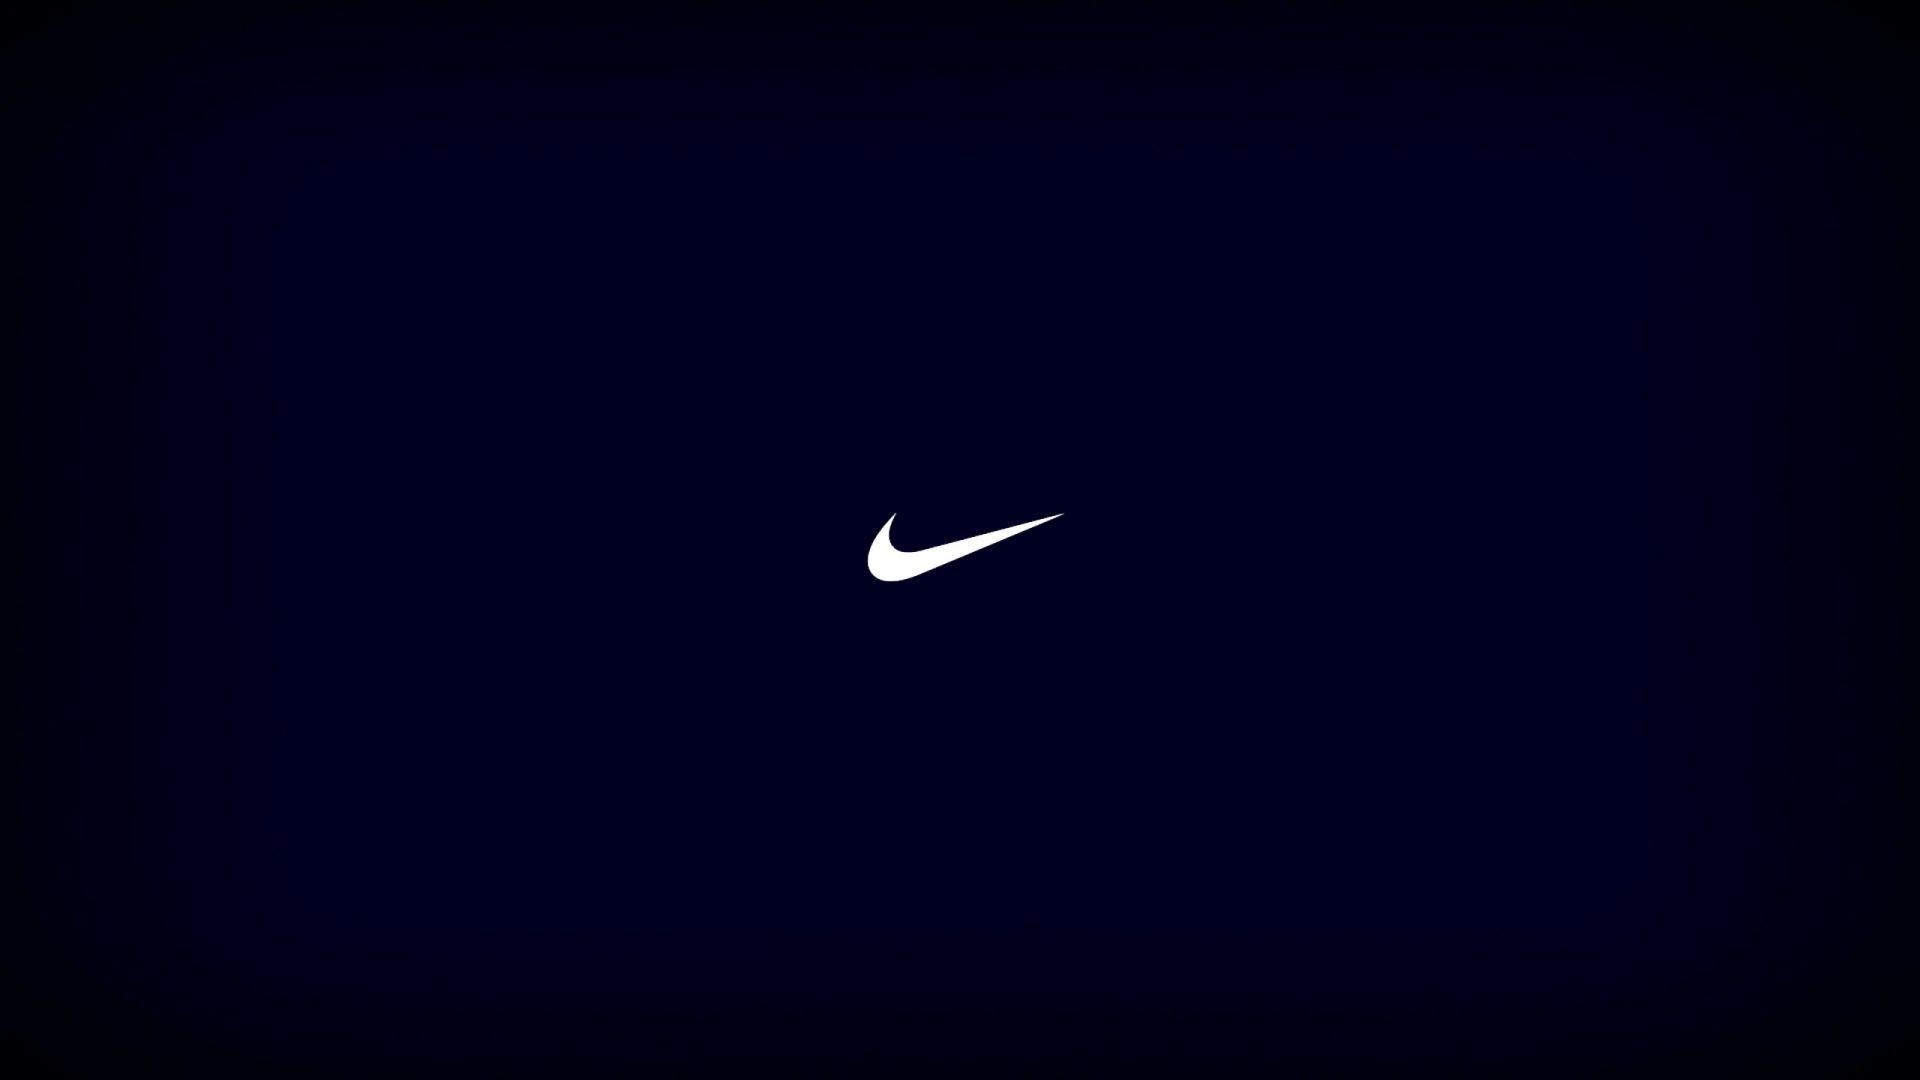 Nike Logo Gray Backgrounds Wallpapers Download Wallpapers